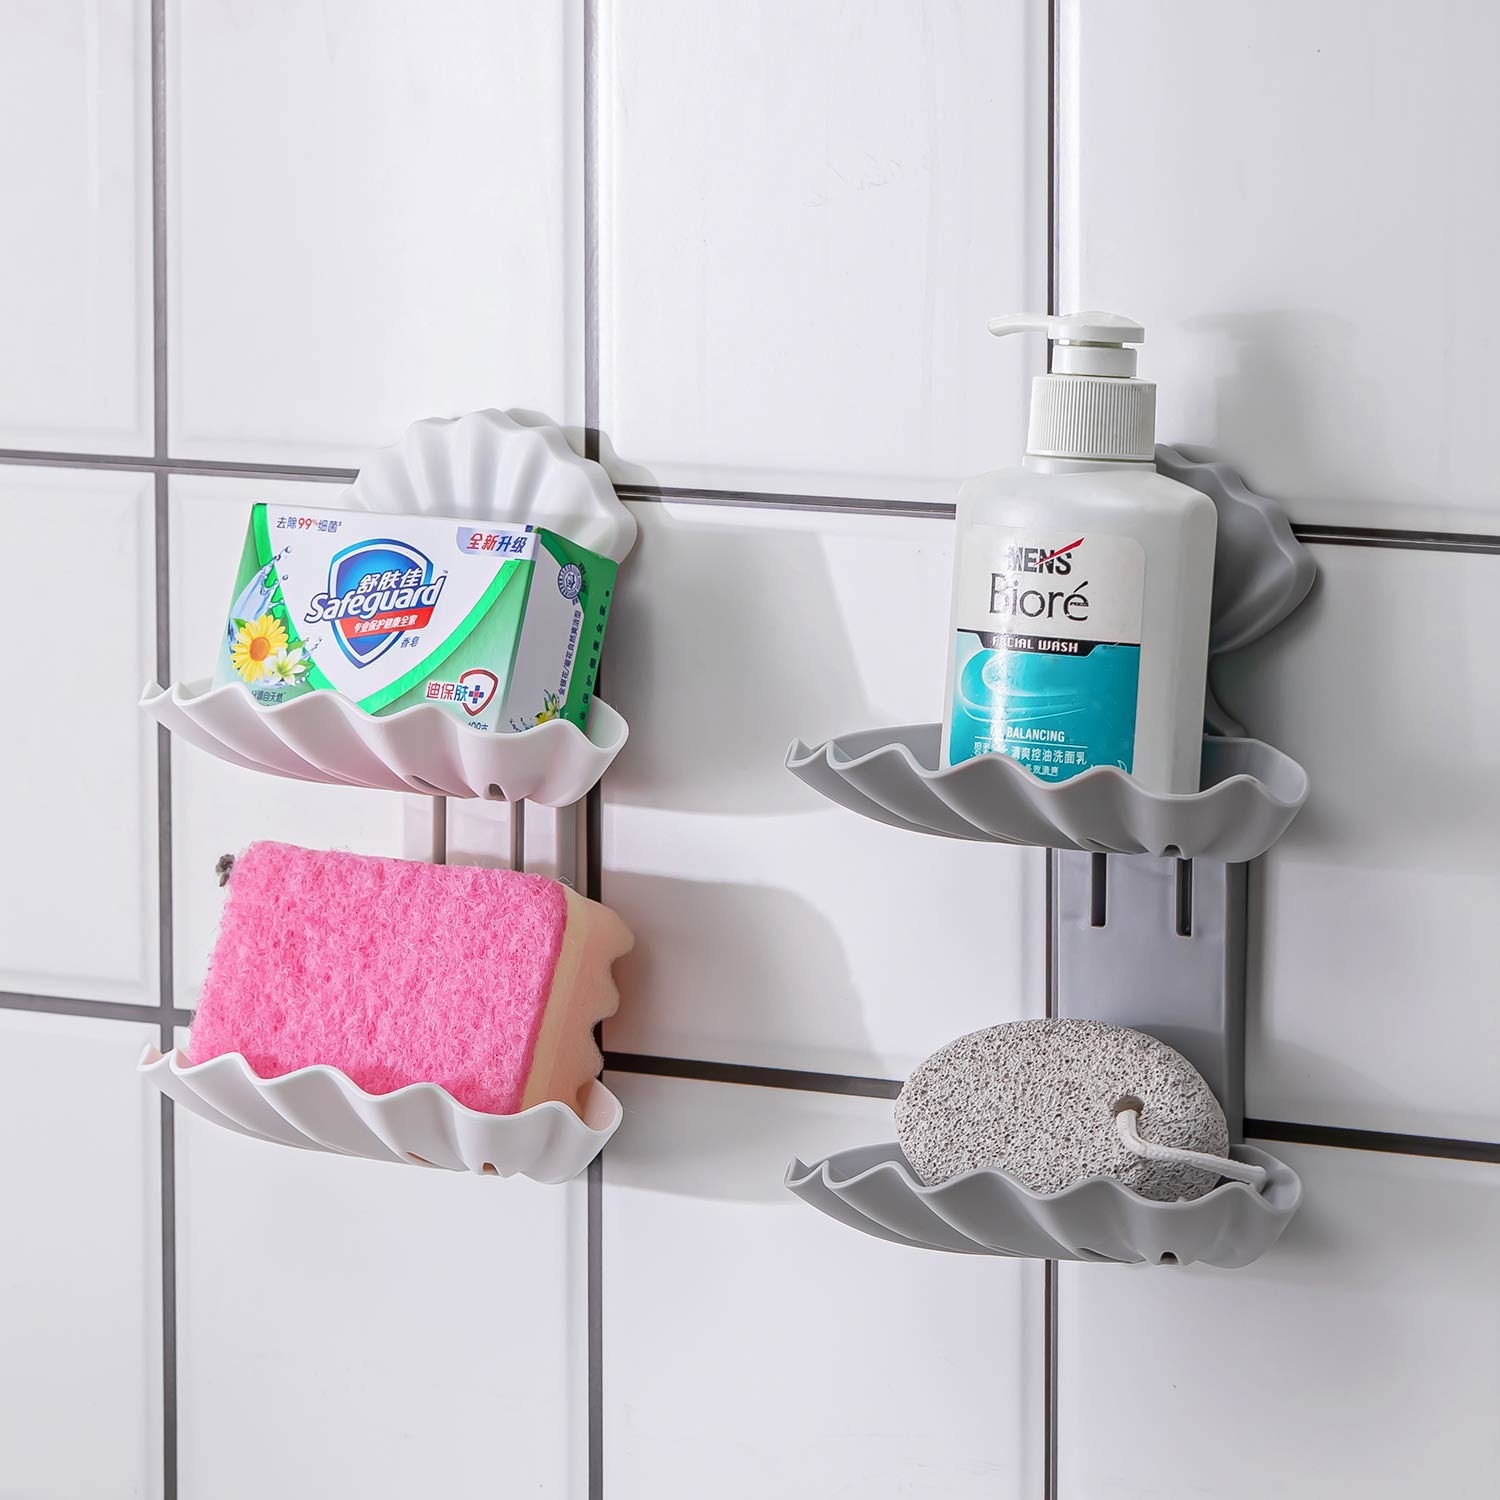 Four shell-shaped soap holders on the wall